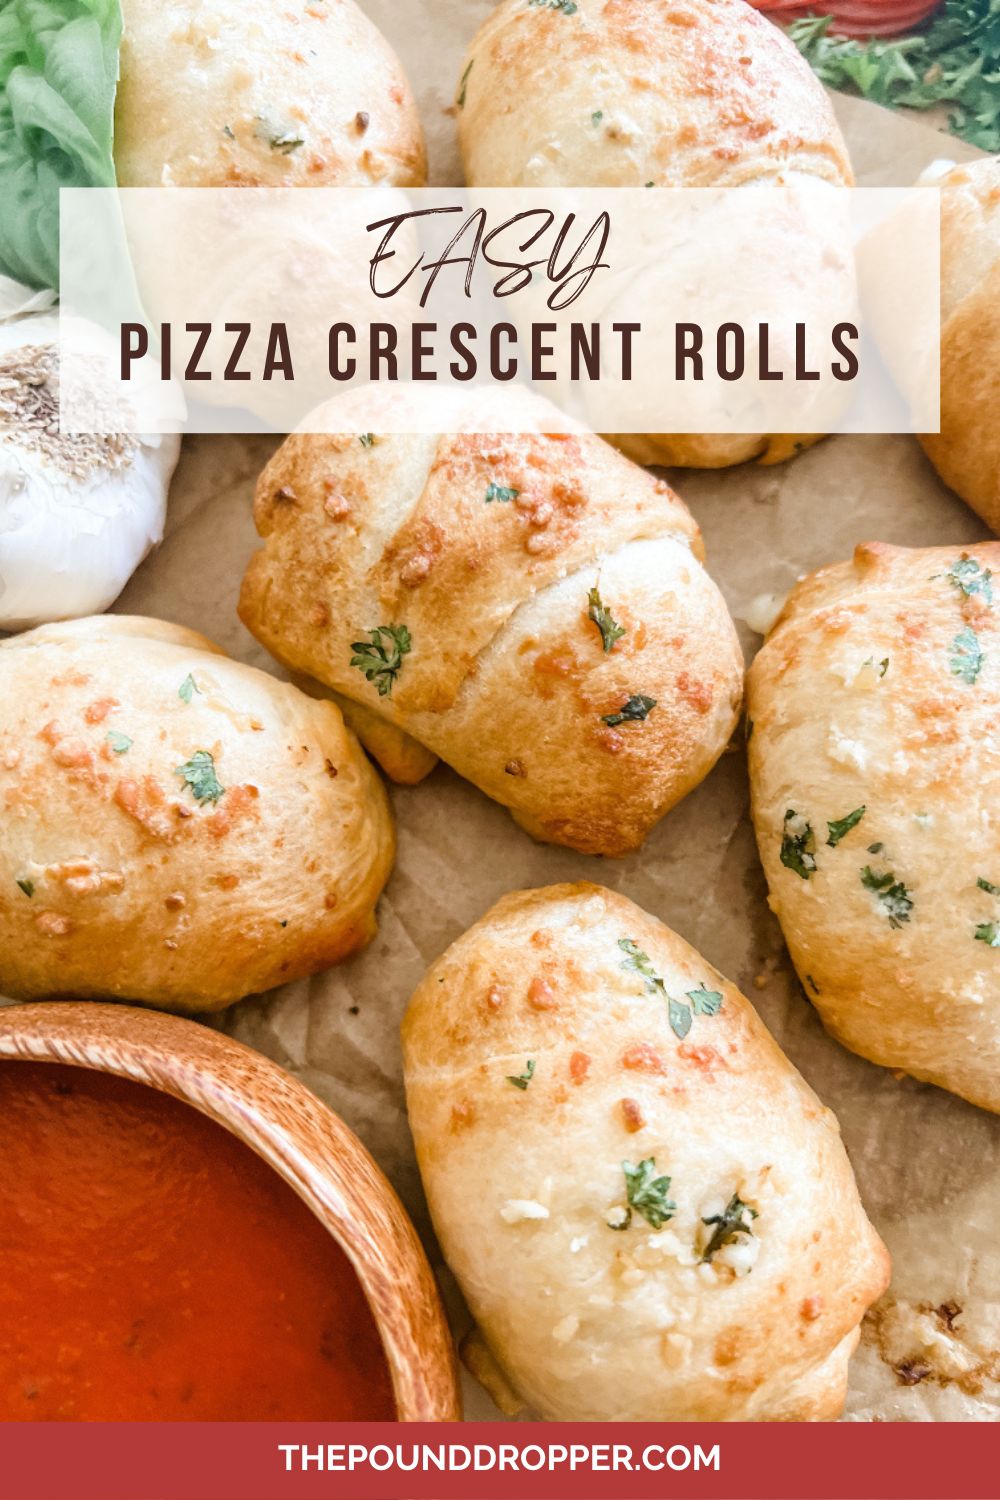 These Easy Pizza Crescent Rolls make for a simple dinner, lunch, or game day appetizer!! You can build-your-own pizza roll using your favorite pizza toppings. These Easy Pizza Crescent Rolls are easy to make using just a few simple ingredients-reduced fat crescent rolls filled with gooey reduced fat mozzarella cheese and turkey pepperoni!! These are guaranteed to be devoured! via @pounddropper